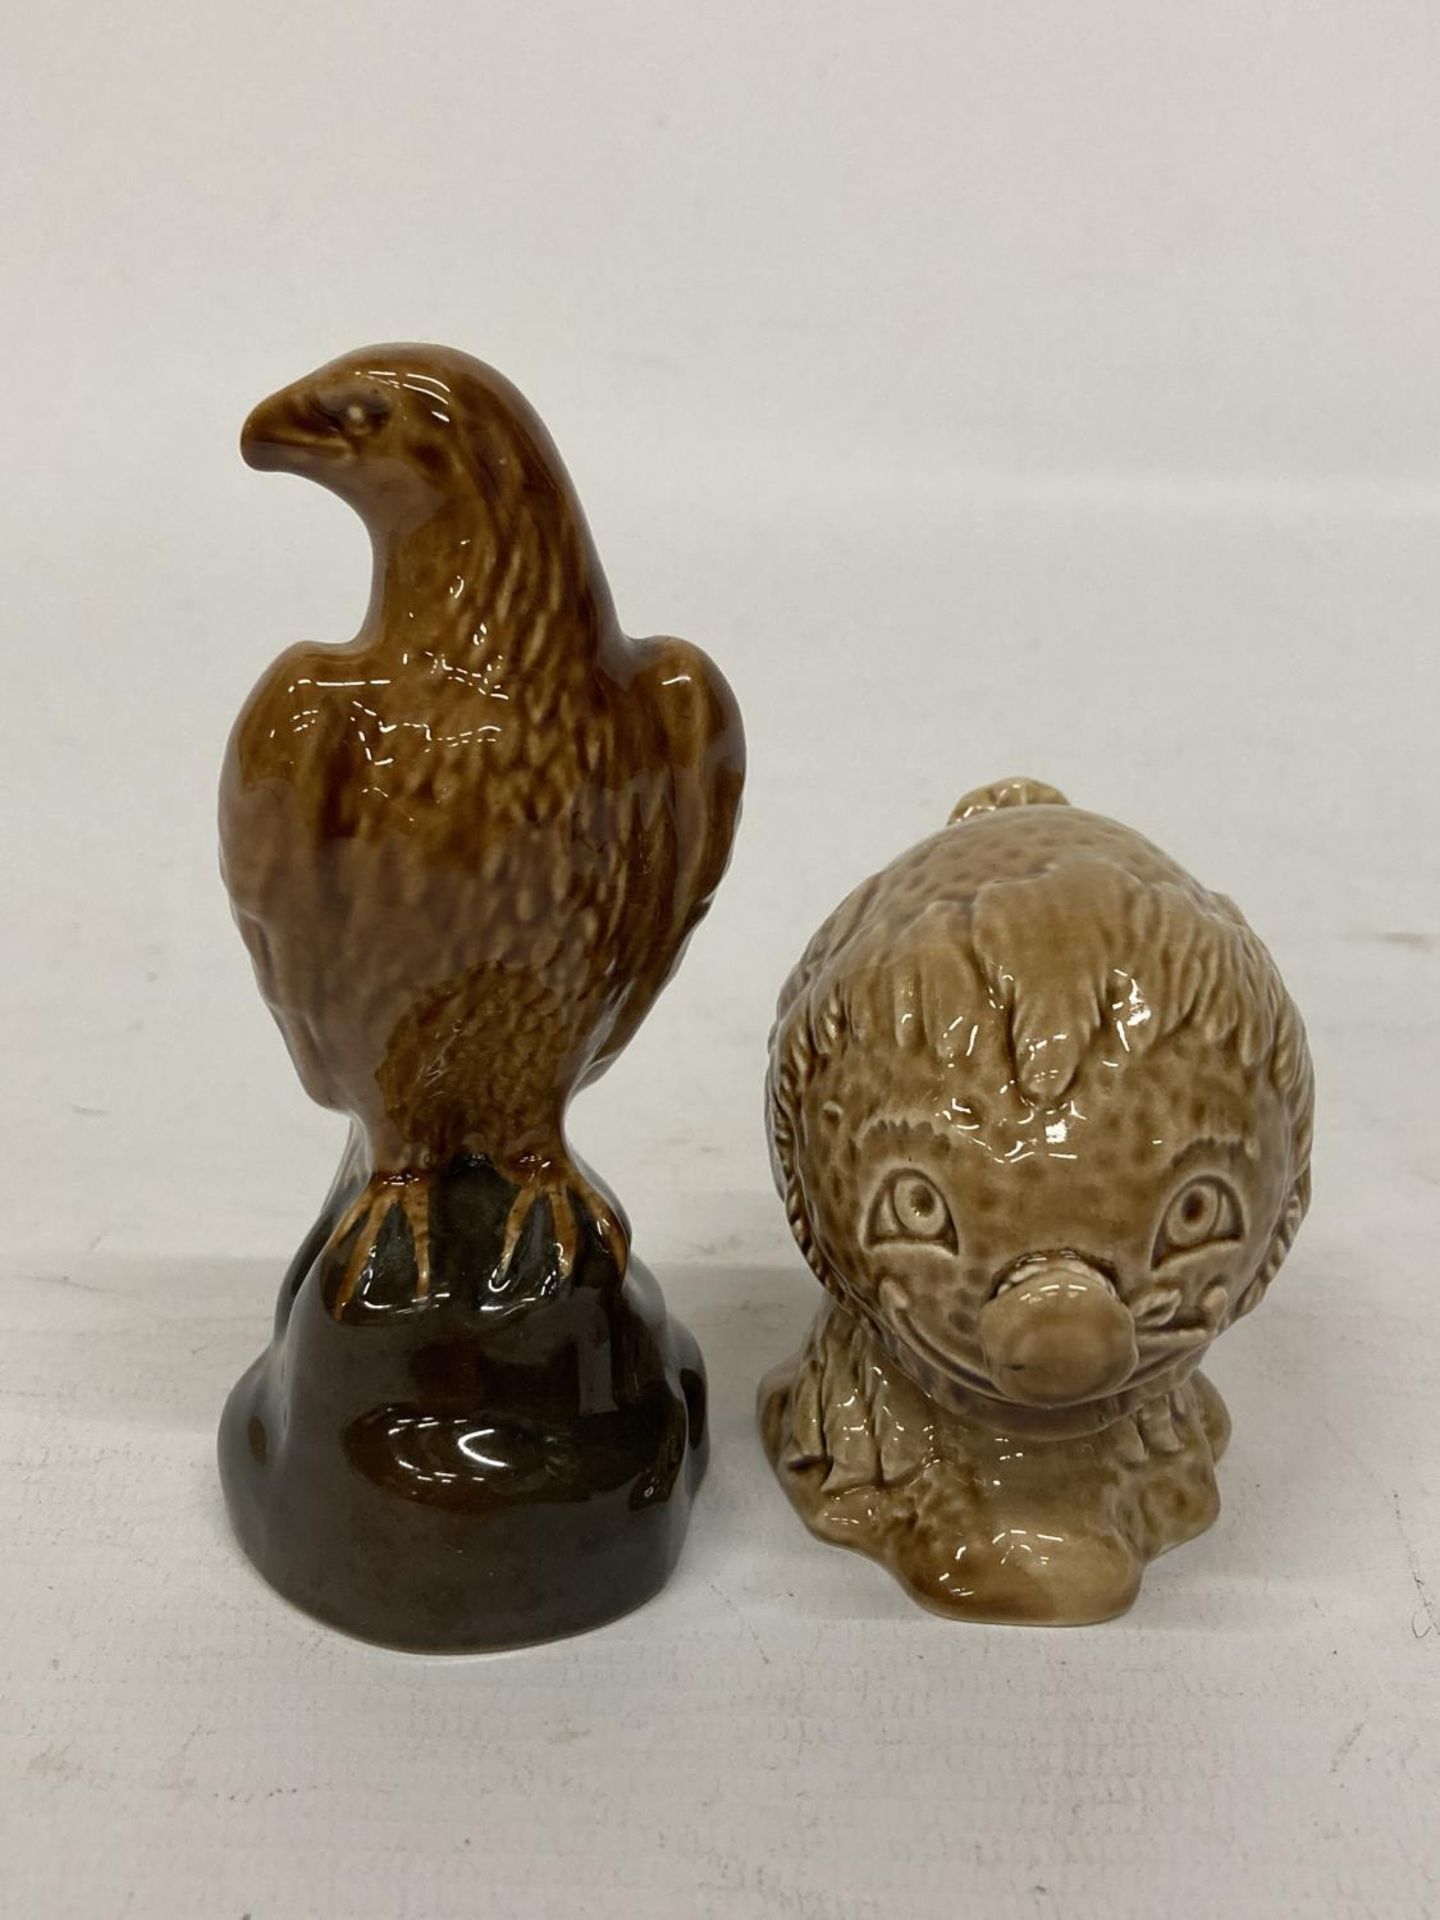 A BESWICK BENEAGLES SCOTCH WHISKEY MINIATURE EAGLE TOGETHER WITH A FLYING HAGGIS MINIATURE - Image 2 of 4